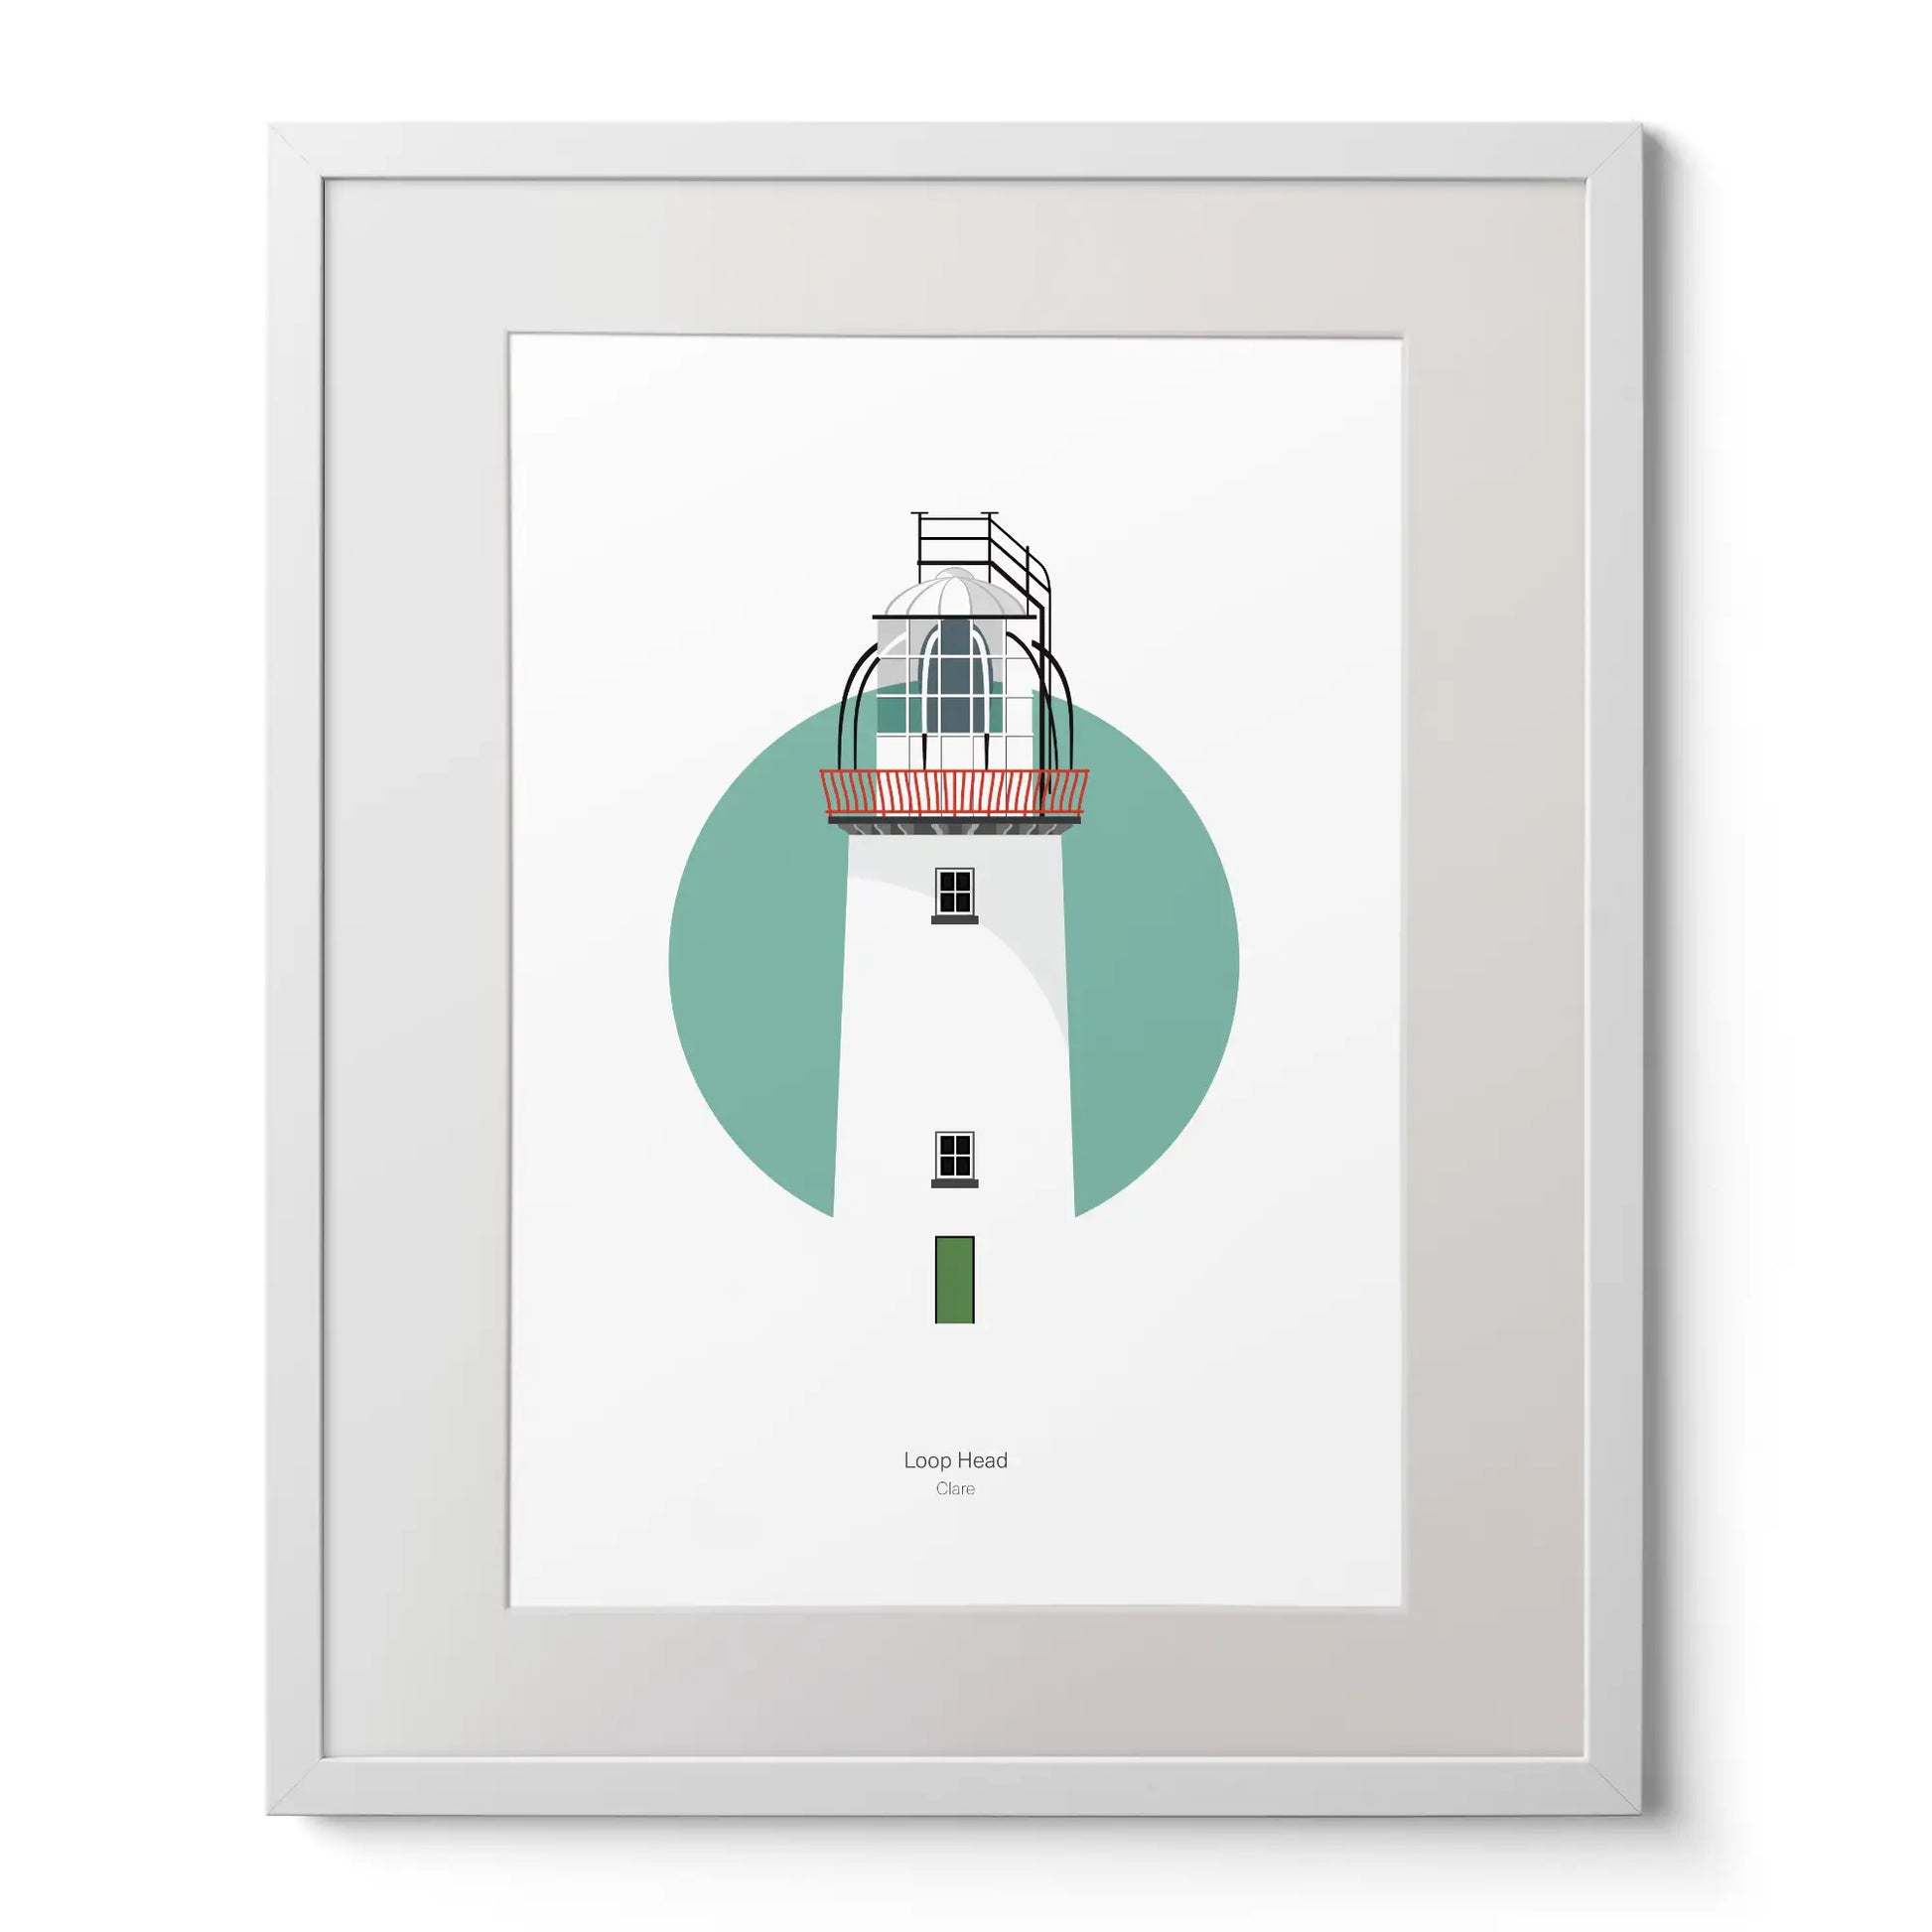 Illustration of Loop Head lighthouse on a white background inside light blue square, mounted and measuring 40x50cm.